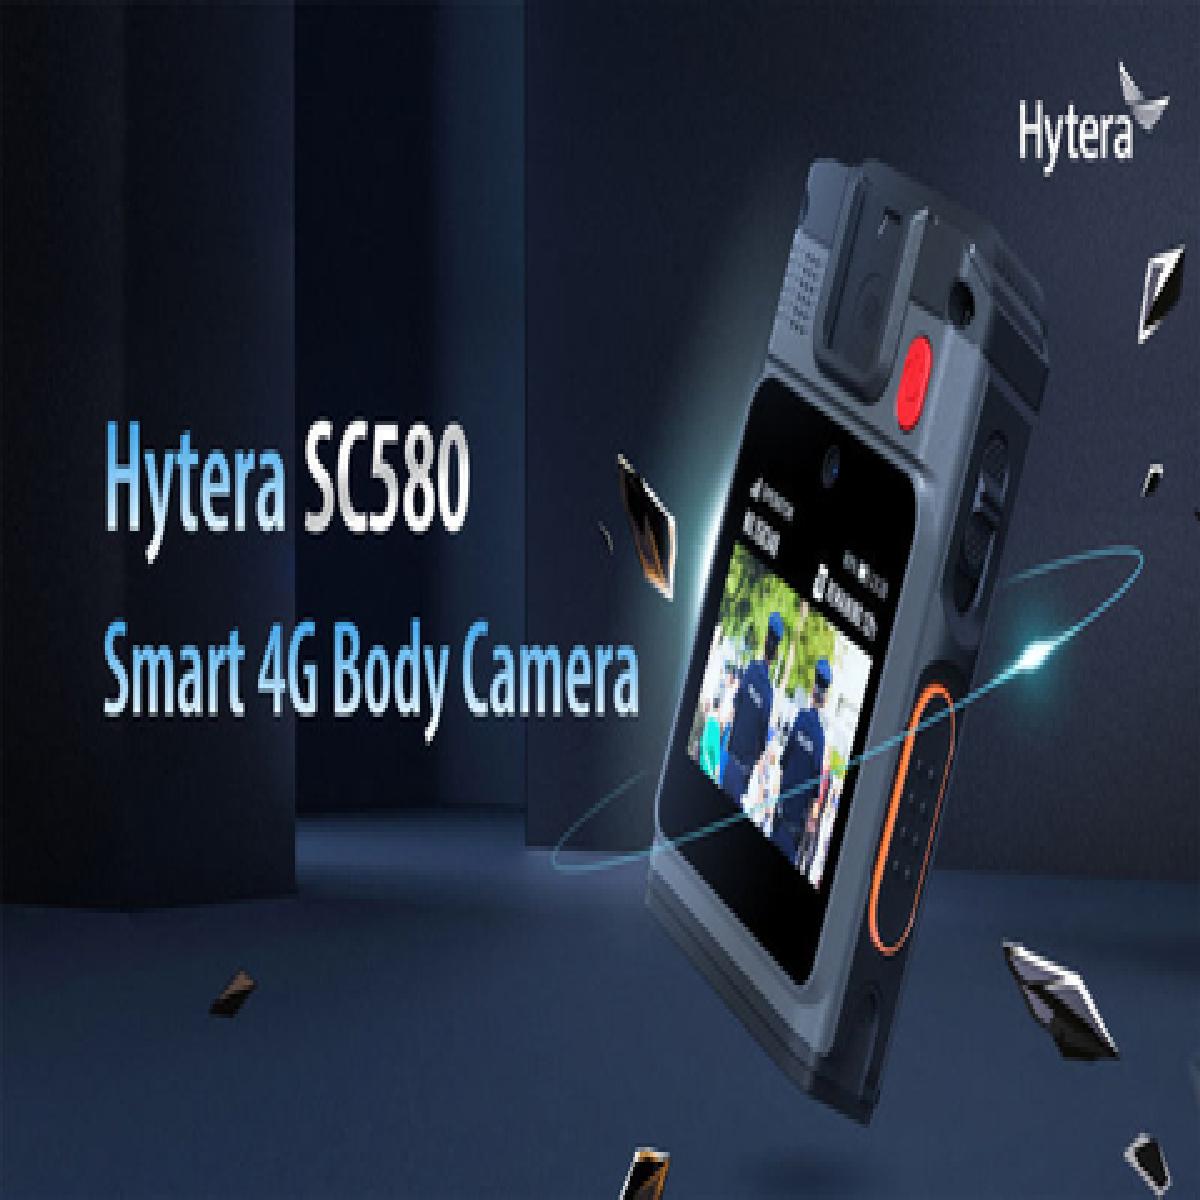 Hytera Releases Smart 4G Body Camera with Push-to-Talk Feature